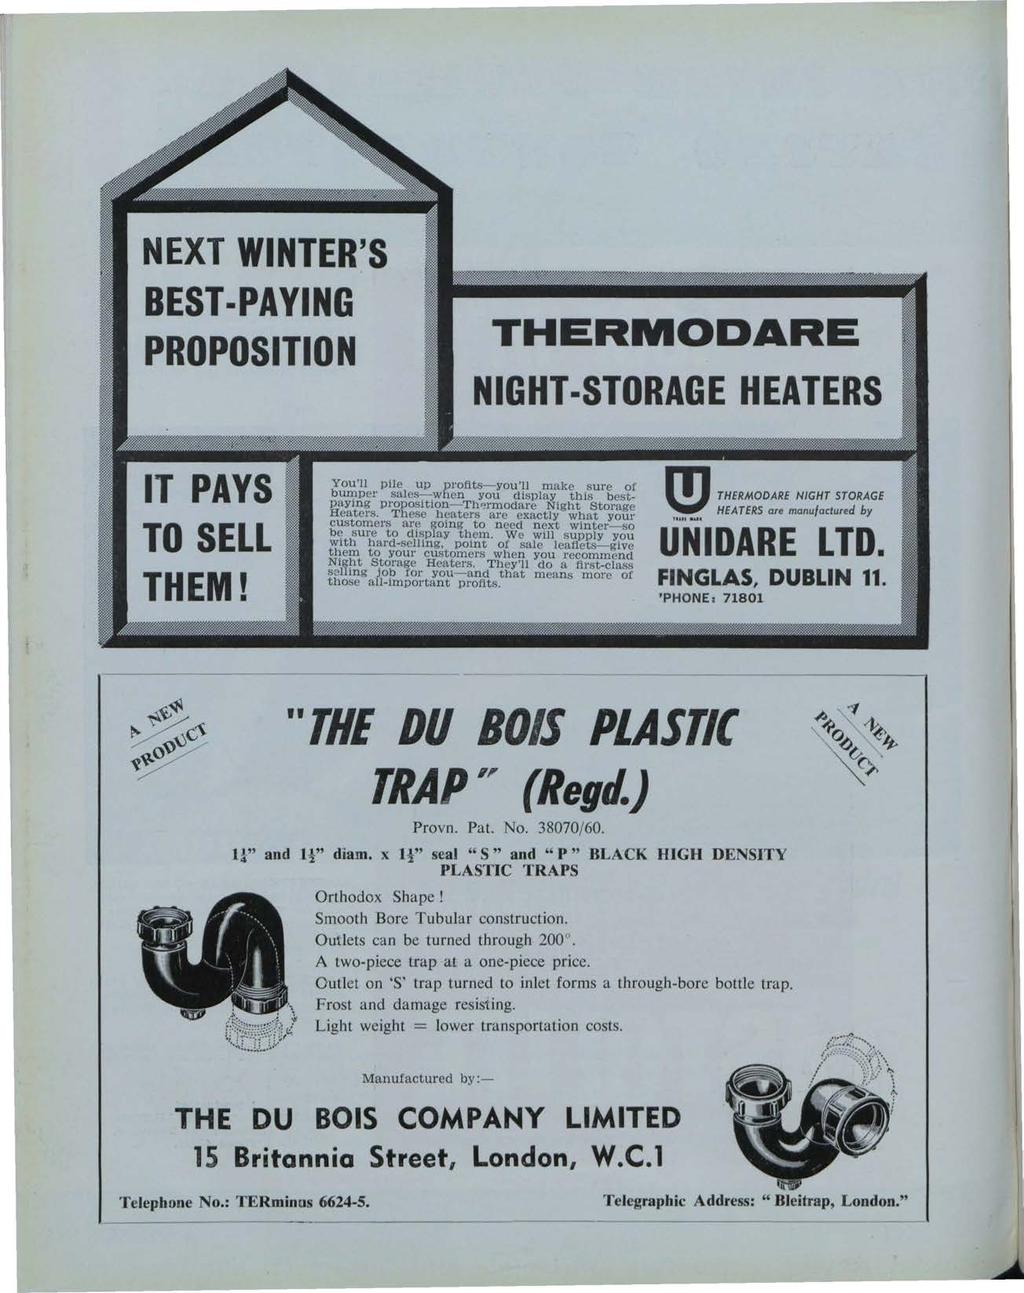 Building Services News, Vol. 2, Iss. 12 [1963], Art. 1 NEXT WINTER'S BEST-PAYING PROPOSITION THERMODARE NIGHT-STORAGE HEATERS IT PAYS TO SELL THEM!